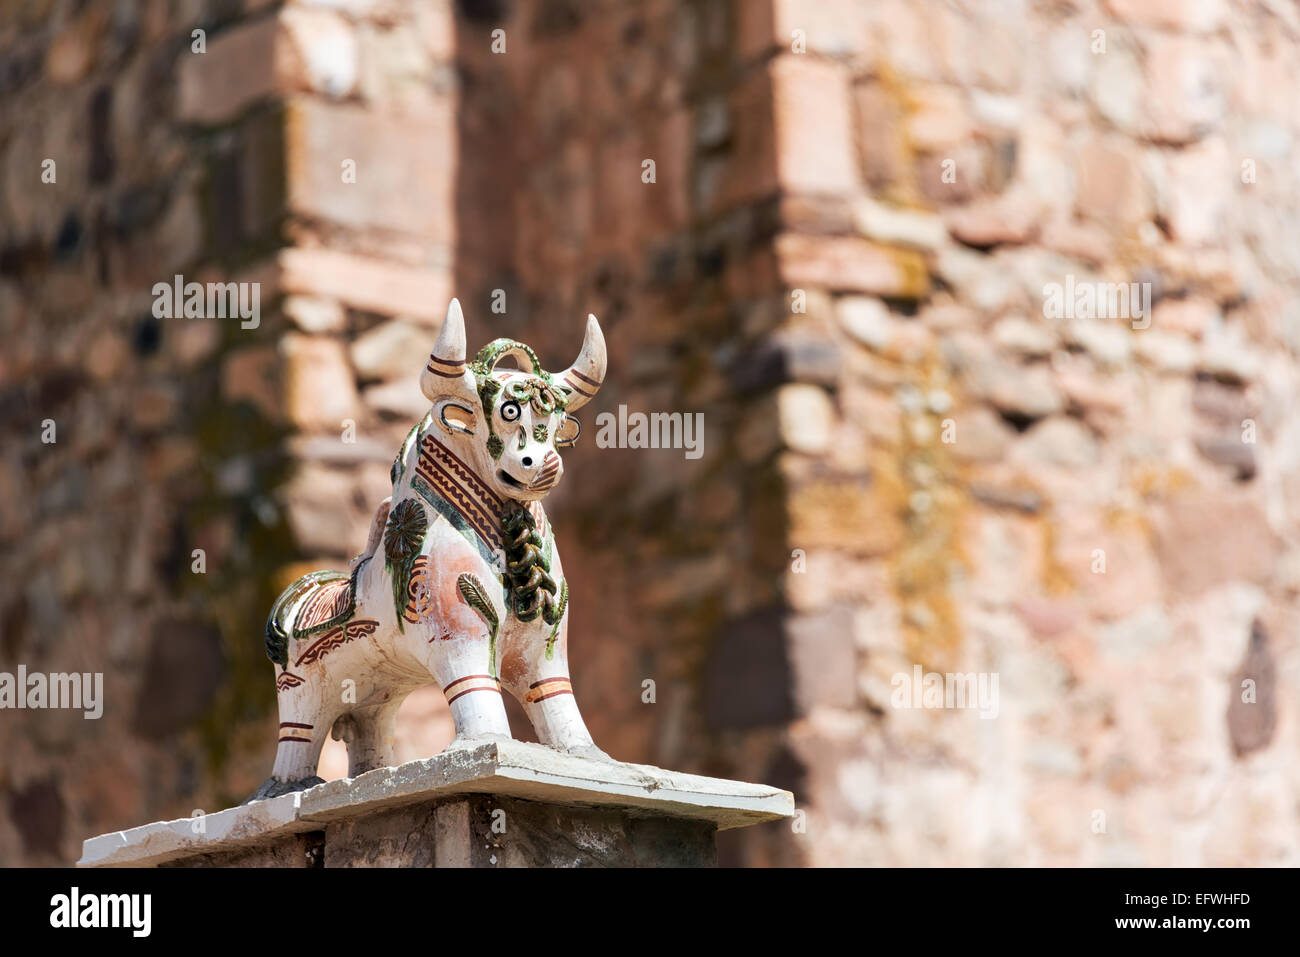 Small bull figurine on a church in Pucara, Peru near Cusco.  The bull is believed to protect buildings. Stock Photo